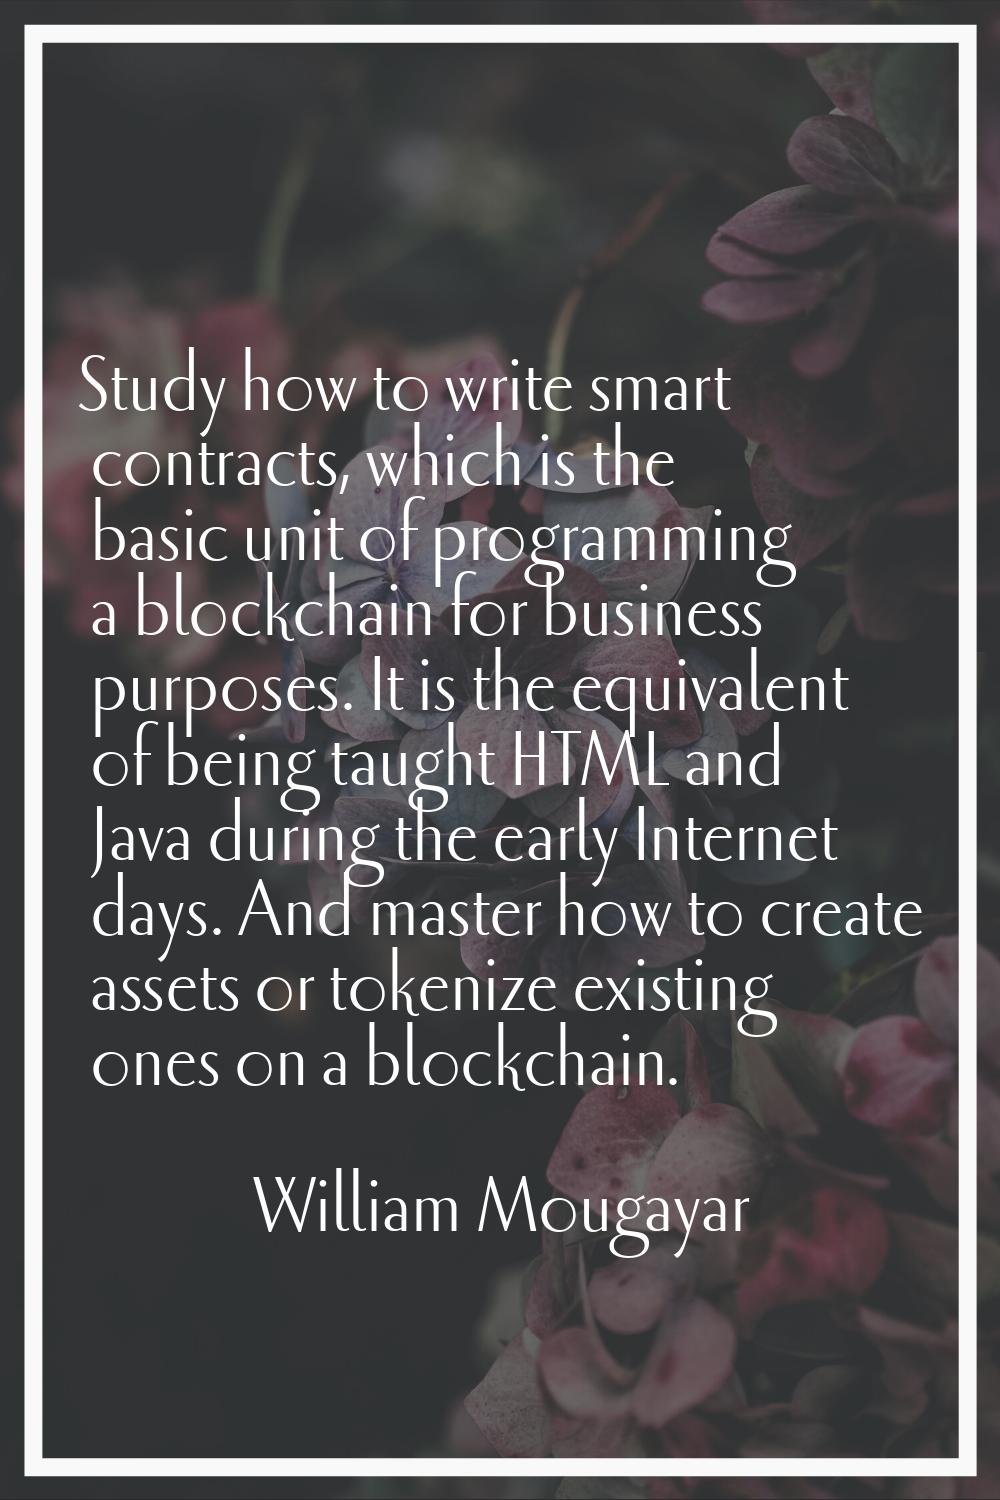 Study how to write smart contracts, which is the basic unit of programming a blockchain for busines